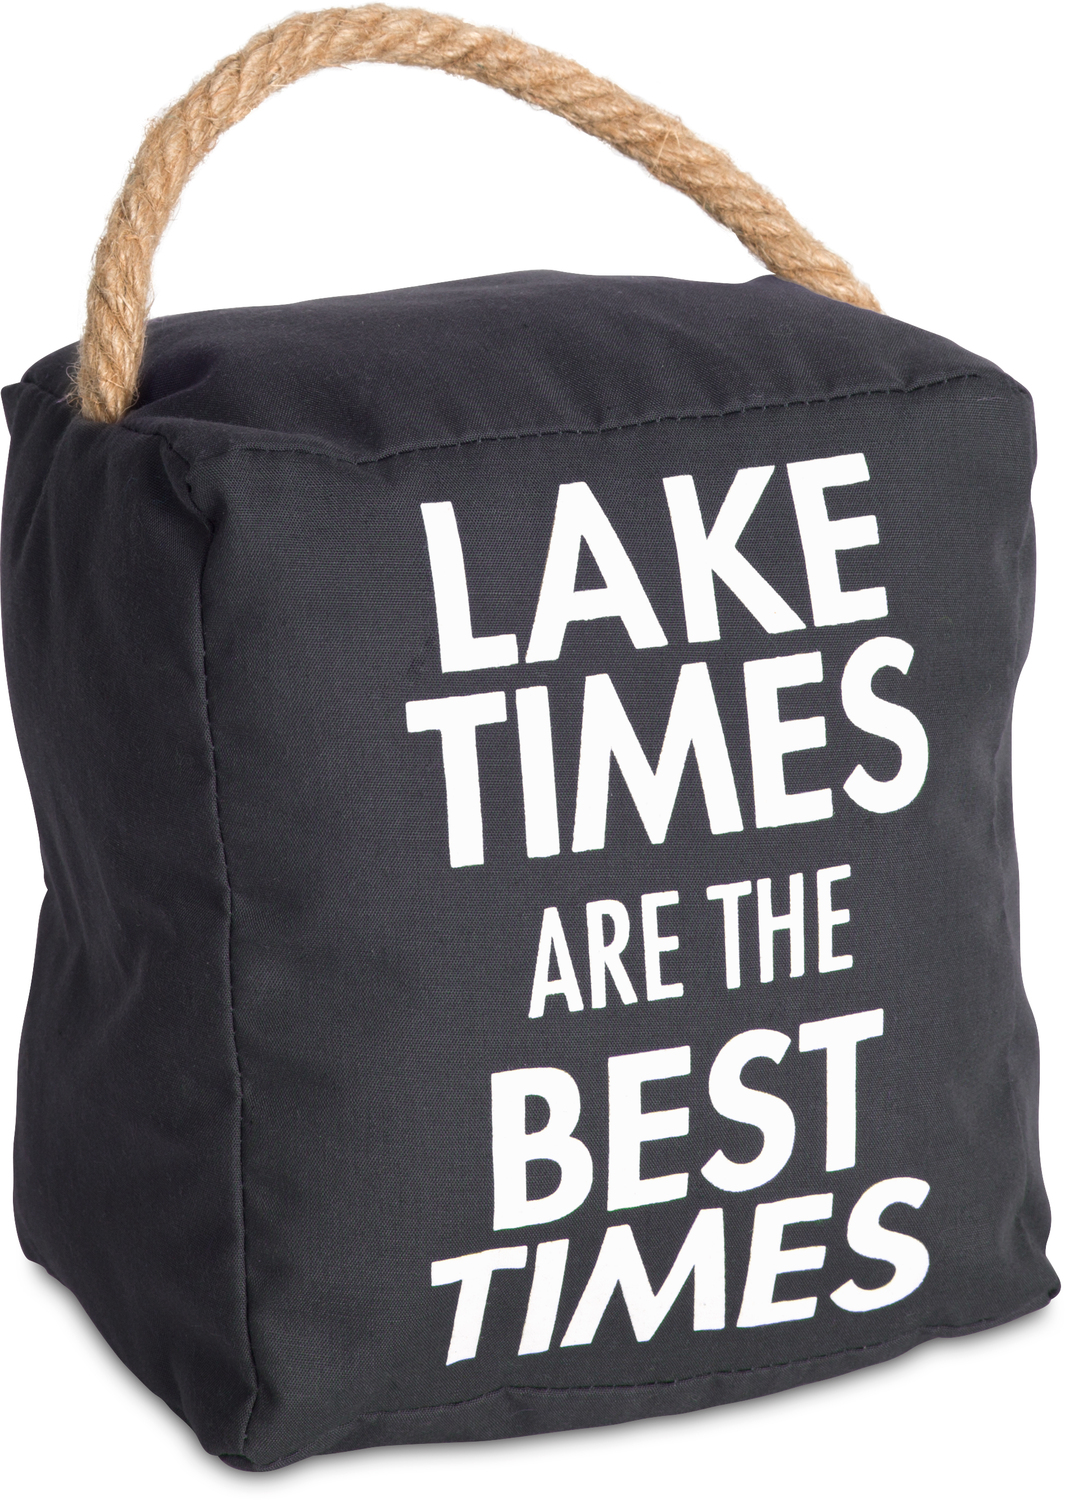 Lake Times by Open Door Decor - Lake Times - 5" x 6" Door Stopper